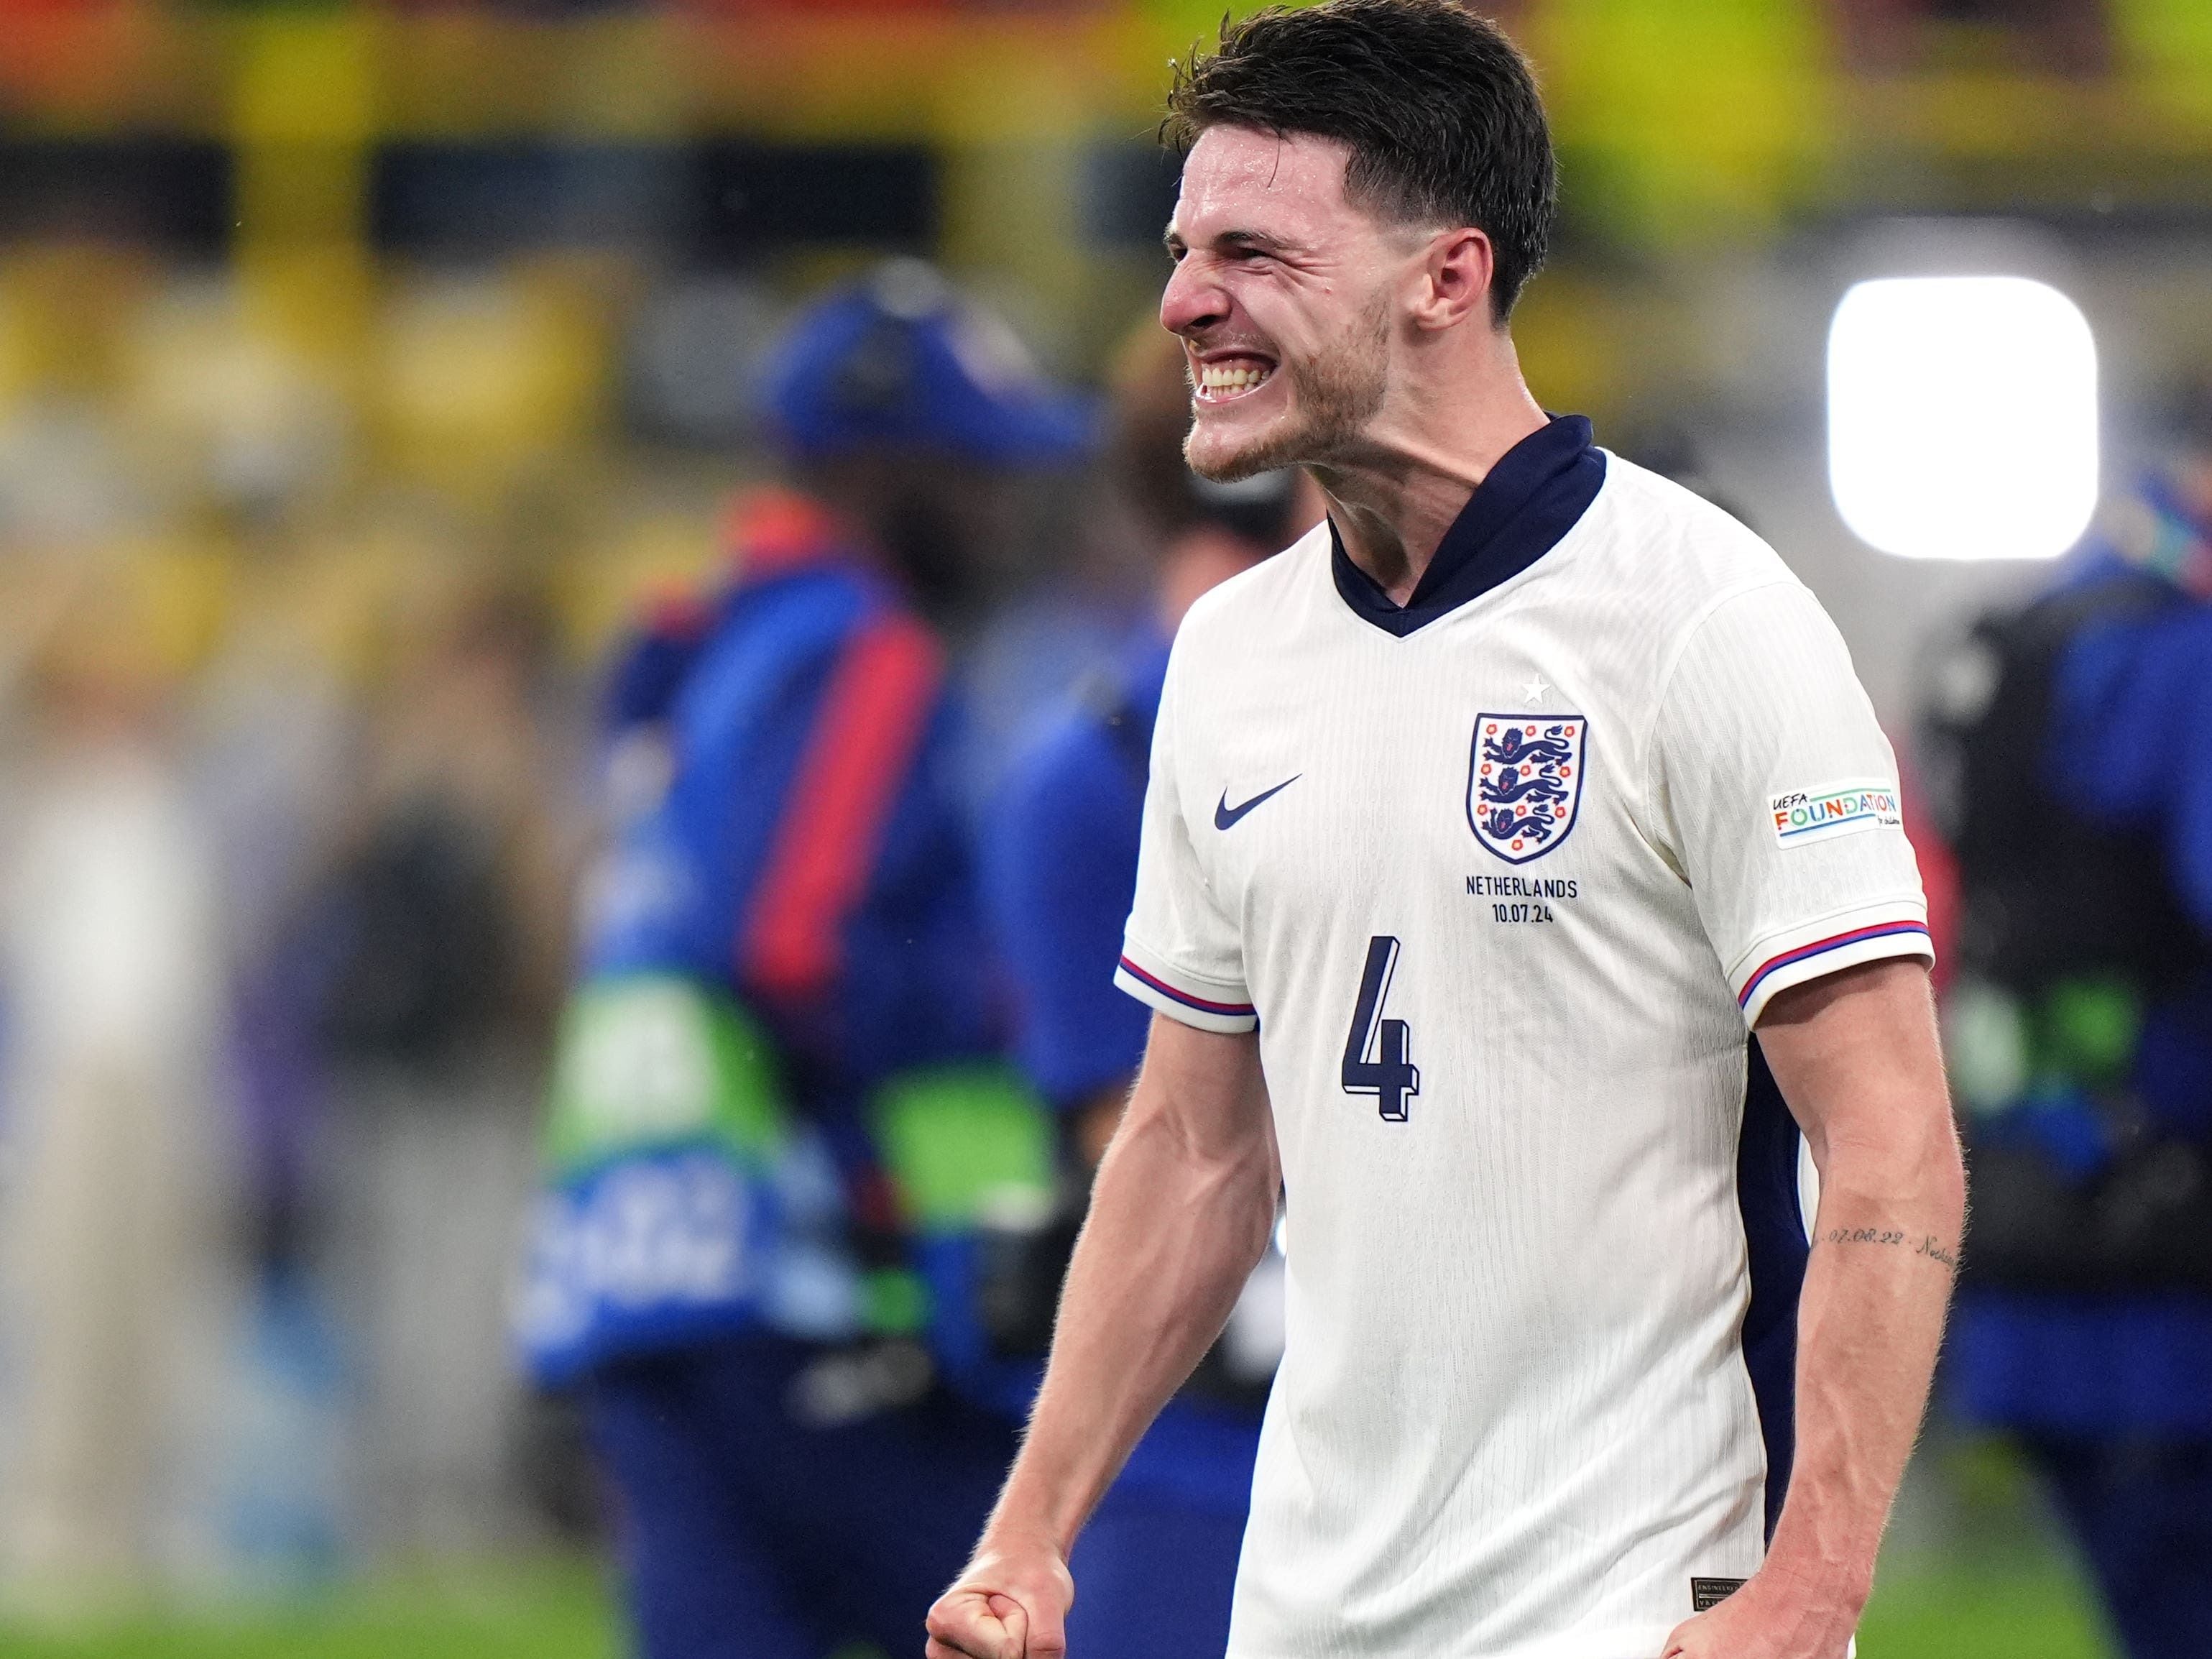 Declan Rice out to rewrite history after being ‘haunted’ by Euro 2020 final loss